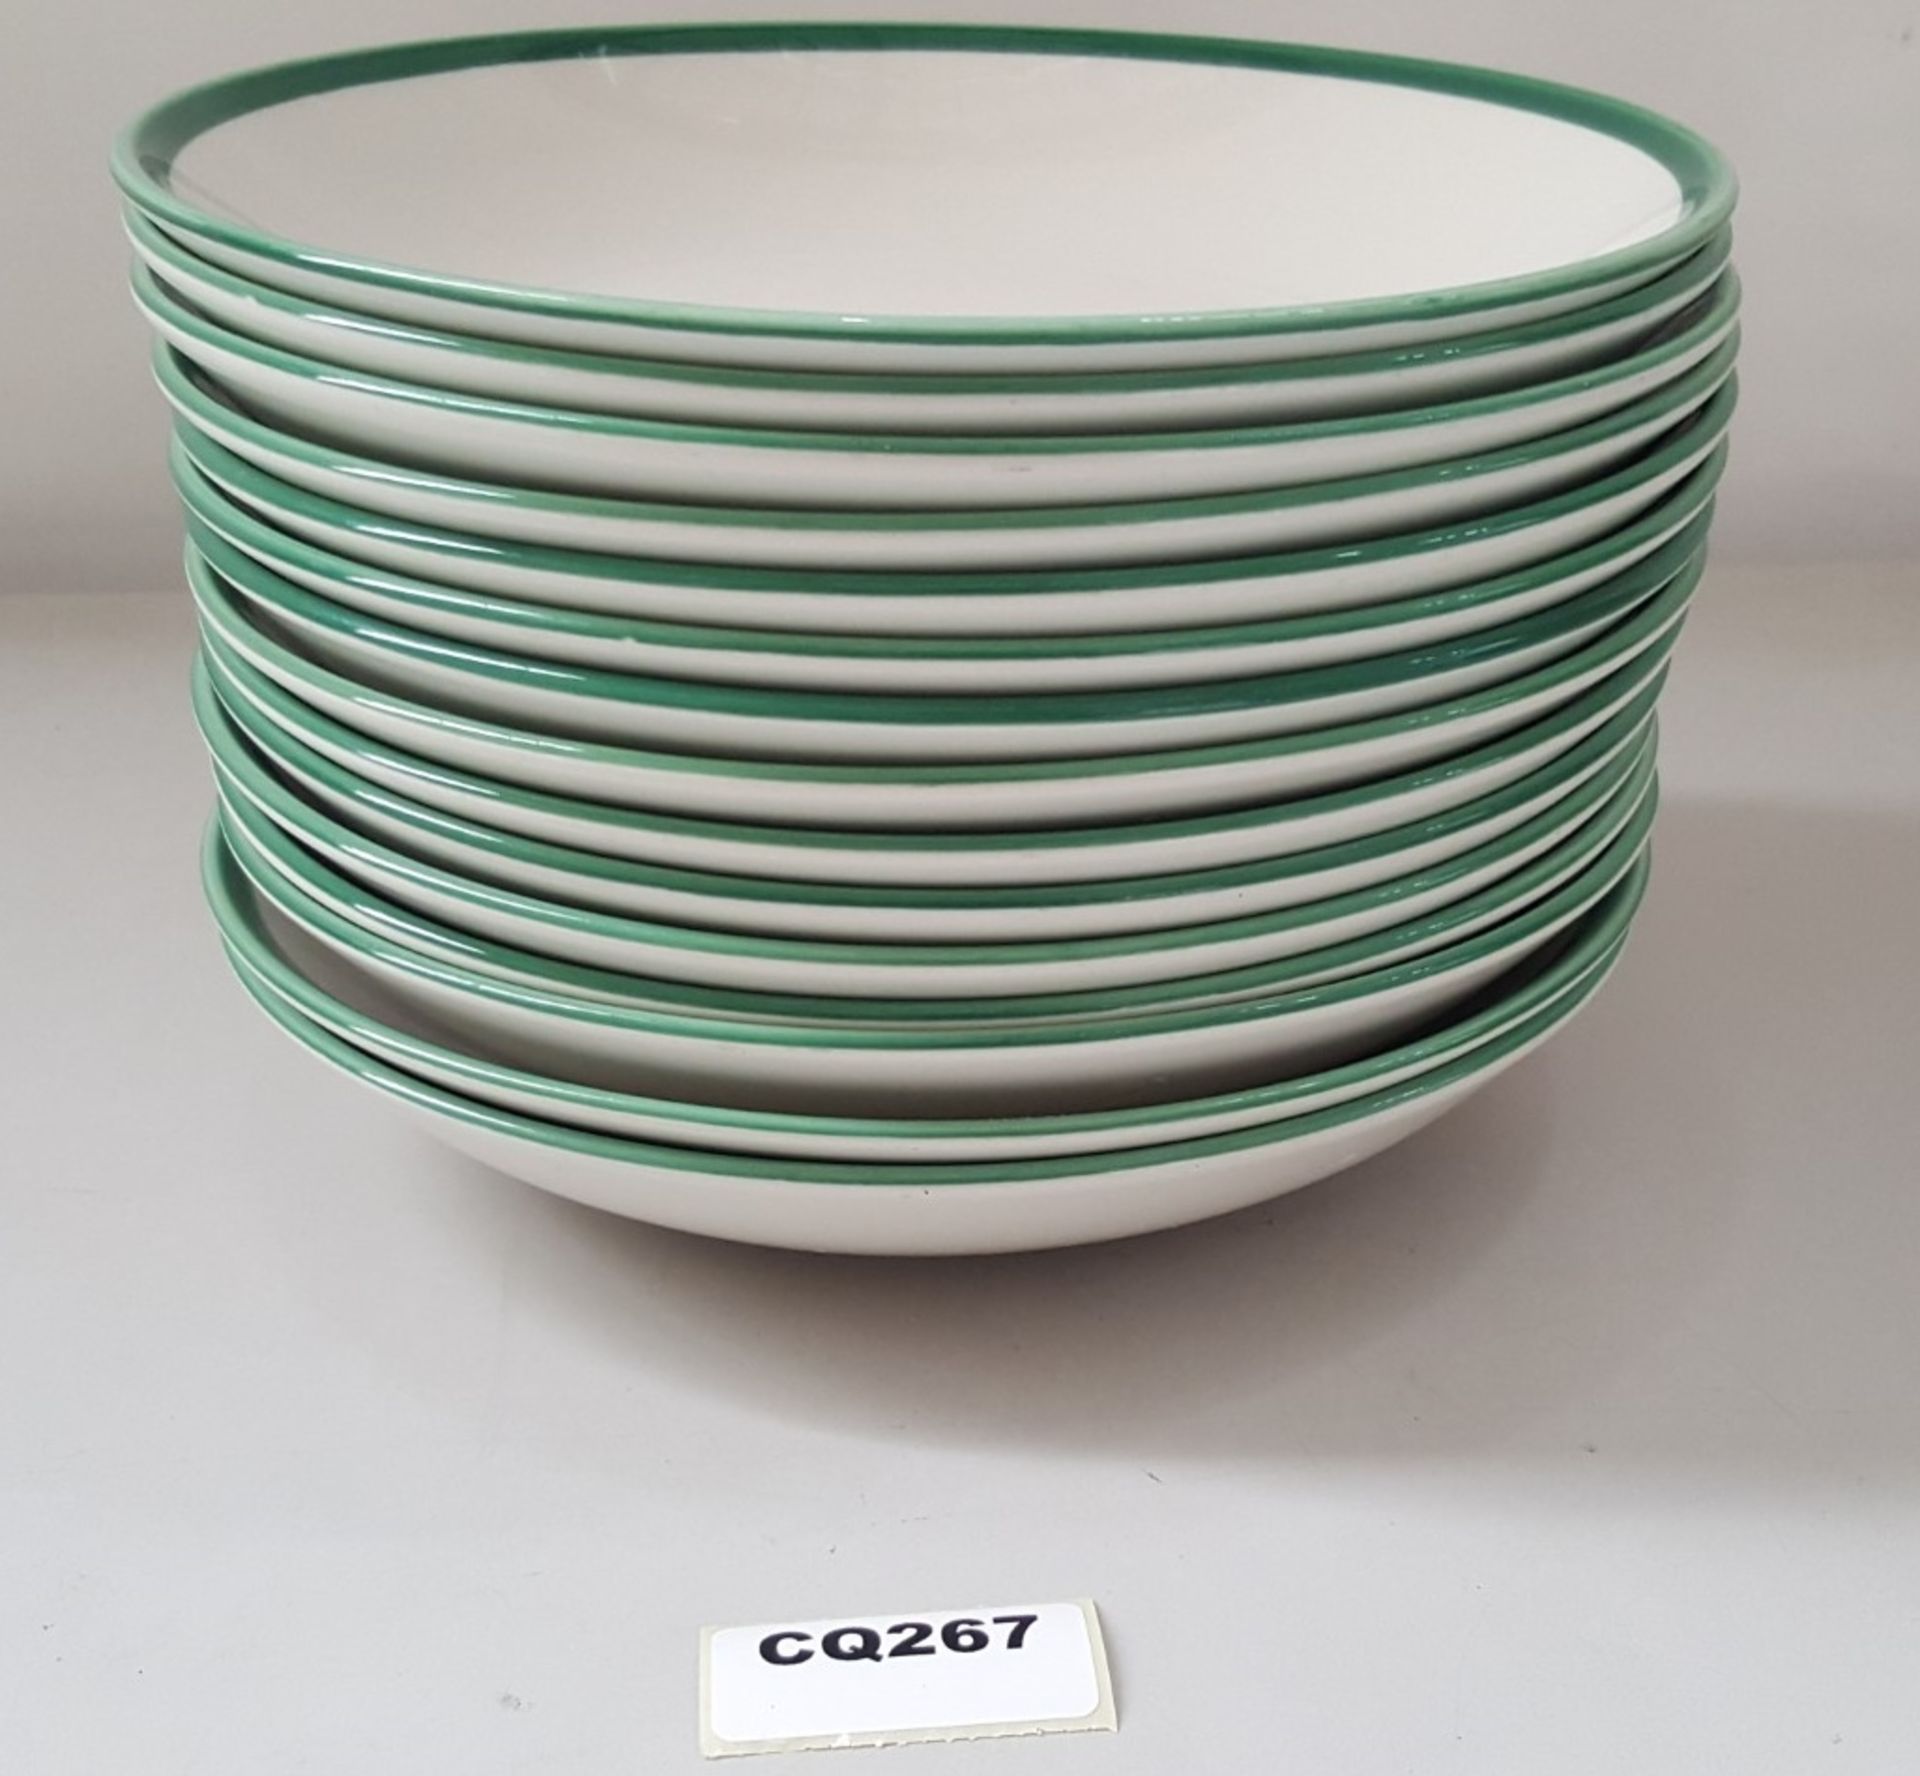 15 x Steelite Coupe Bowls White With Green Outline Egde 25CM - Ref CQ267 - Image 2 of 5